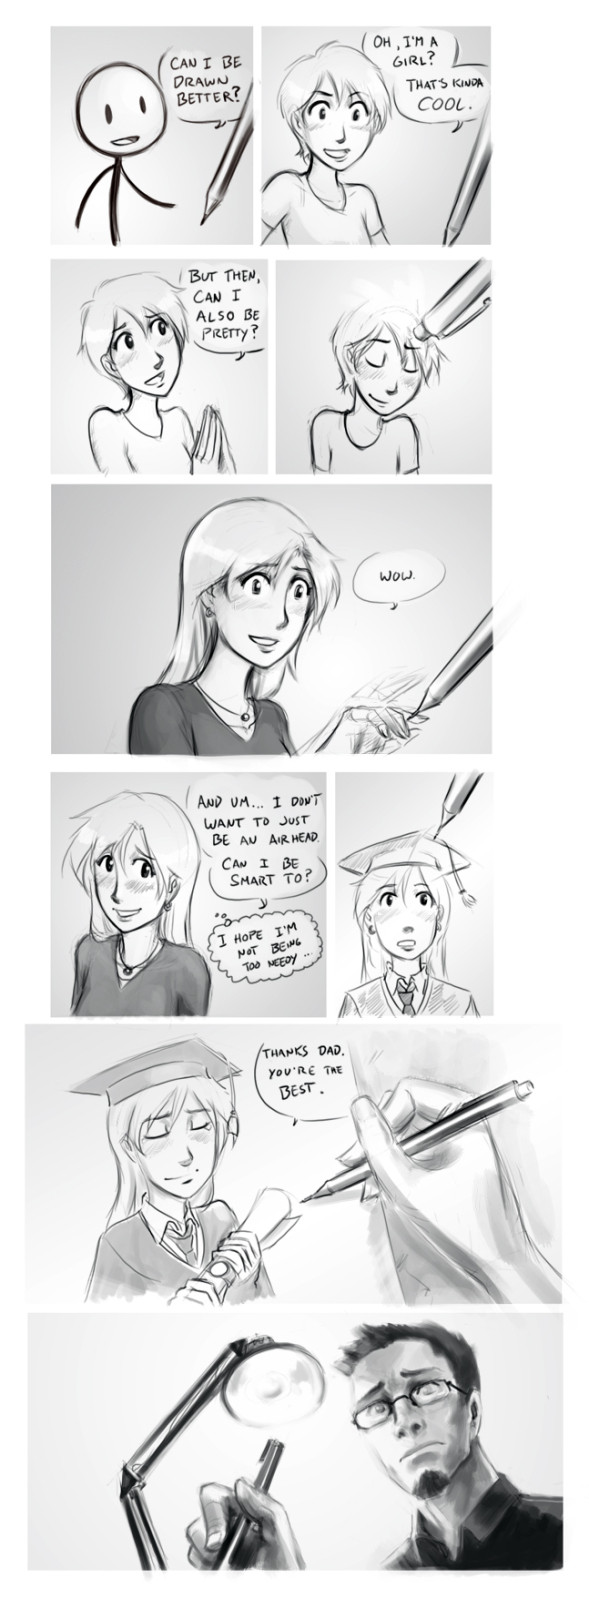 can i be drawn better comic Can I Be Drawn Better? [Comic Strip]